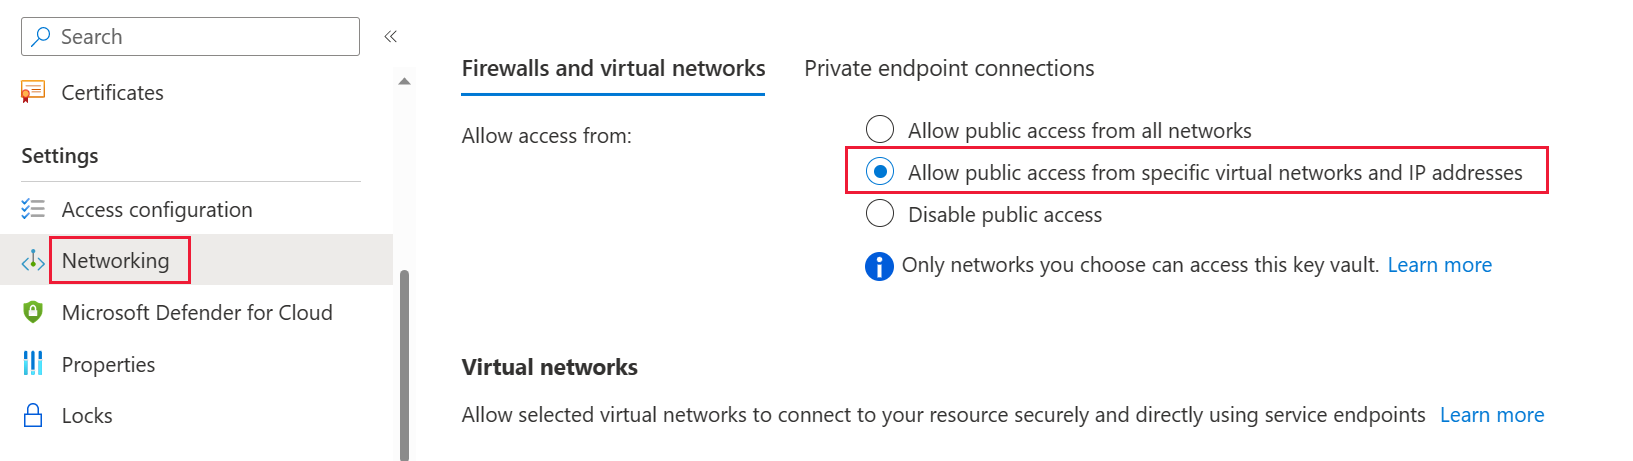 A screenshot showing the Azure Key Vault networking option, with the firewalls and virtual networks option selected.